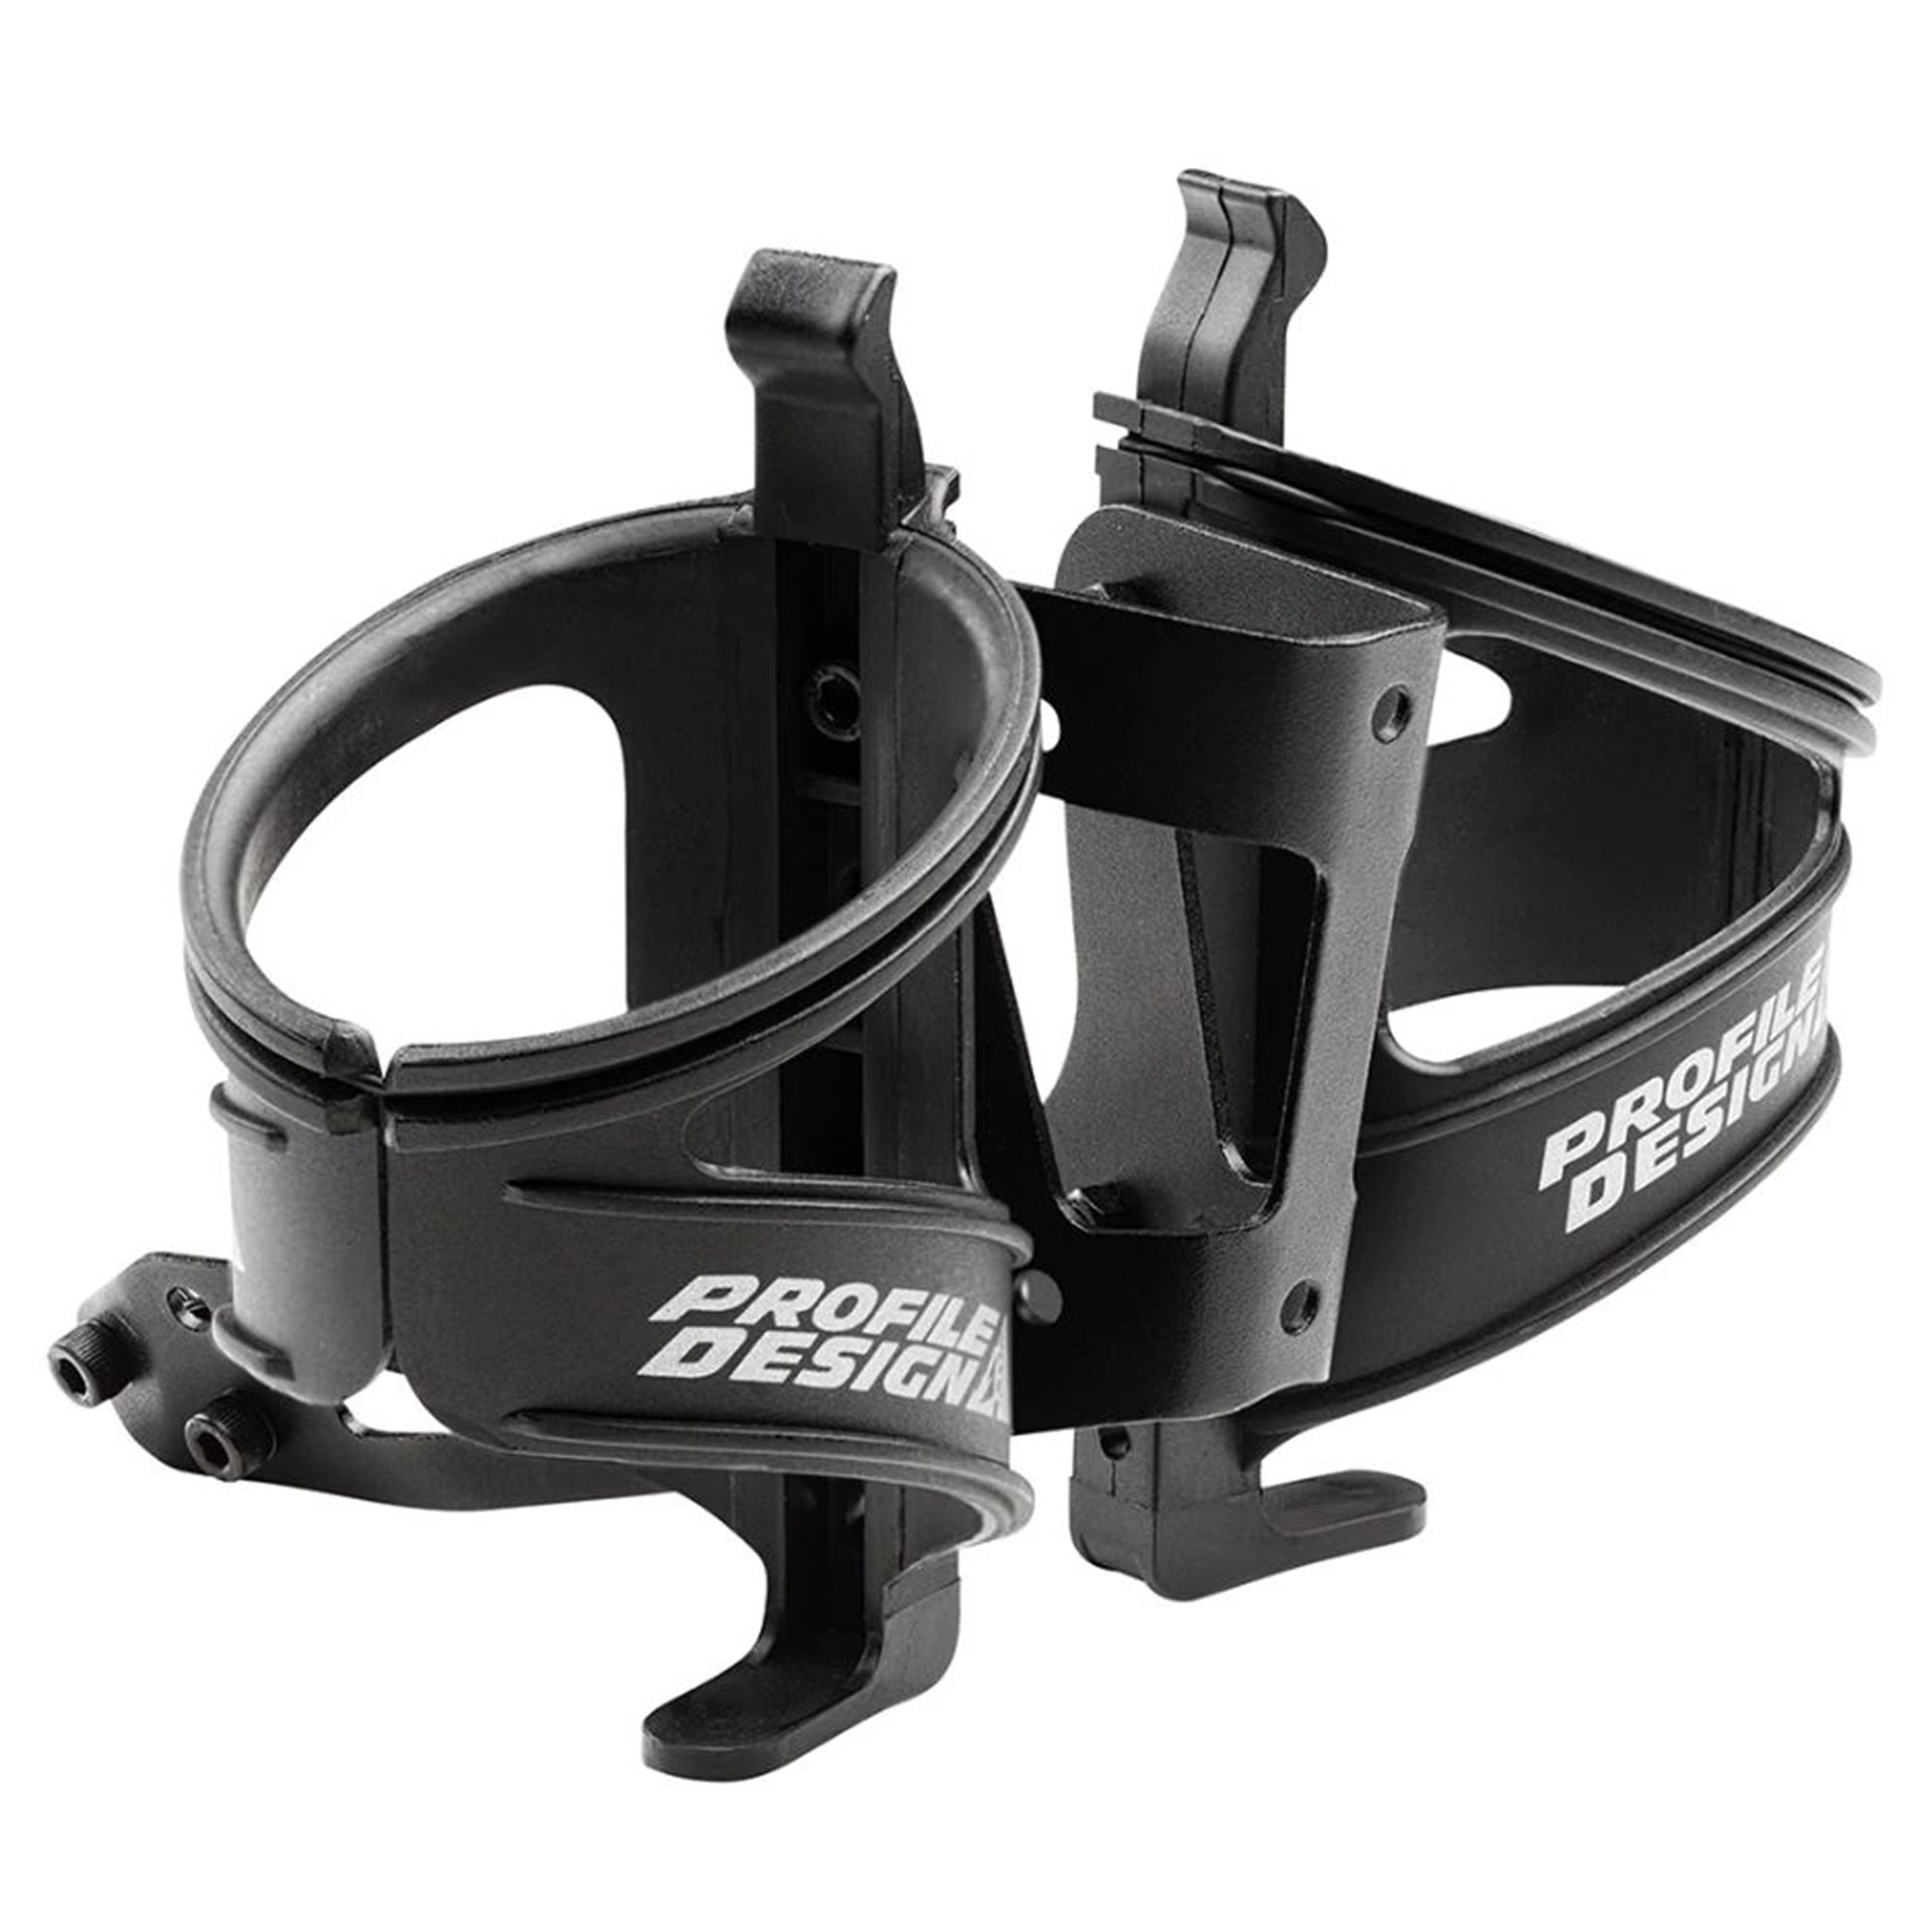 Profile Design RML Rear Mount Dual Bottle Cage Bicycle Hydration System - image 1 of 2